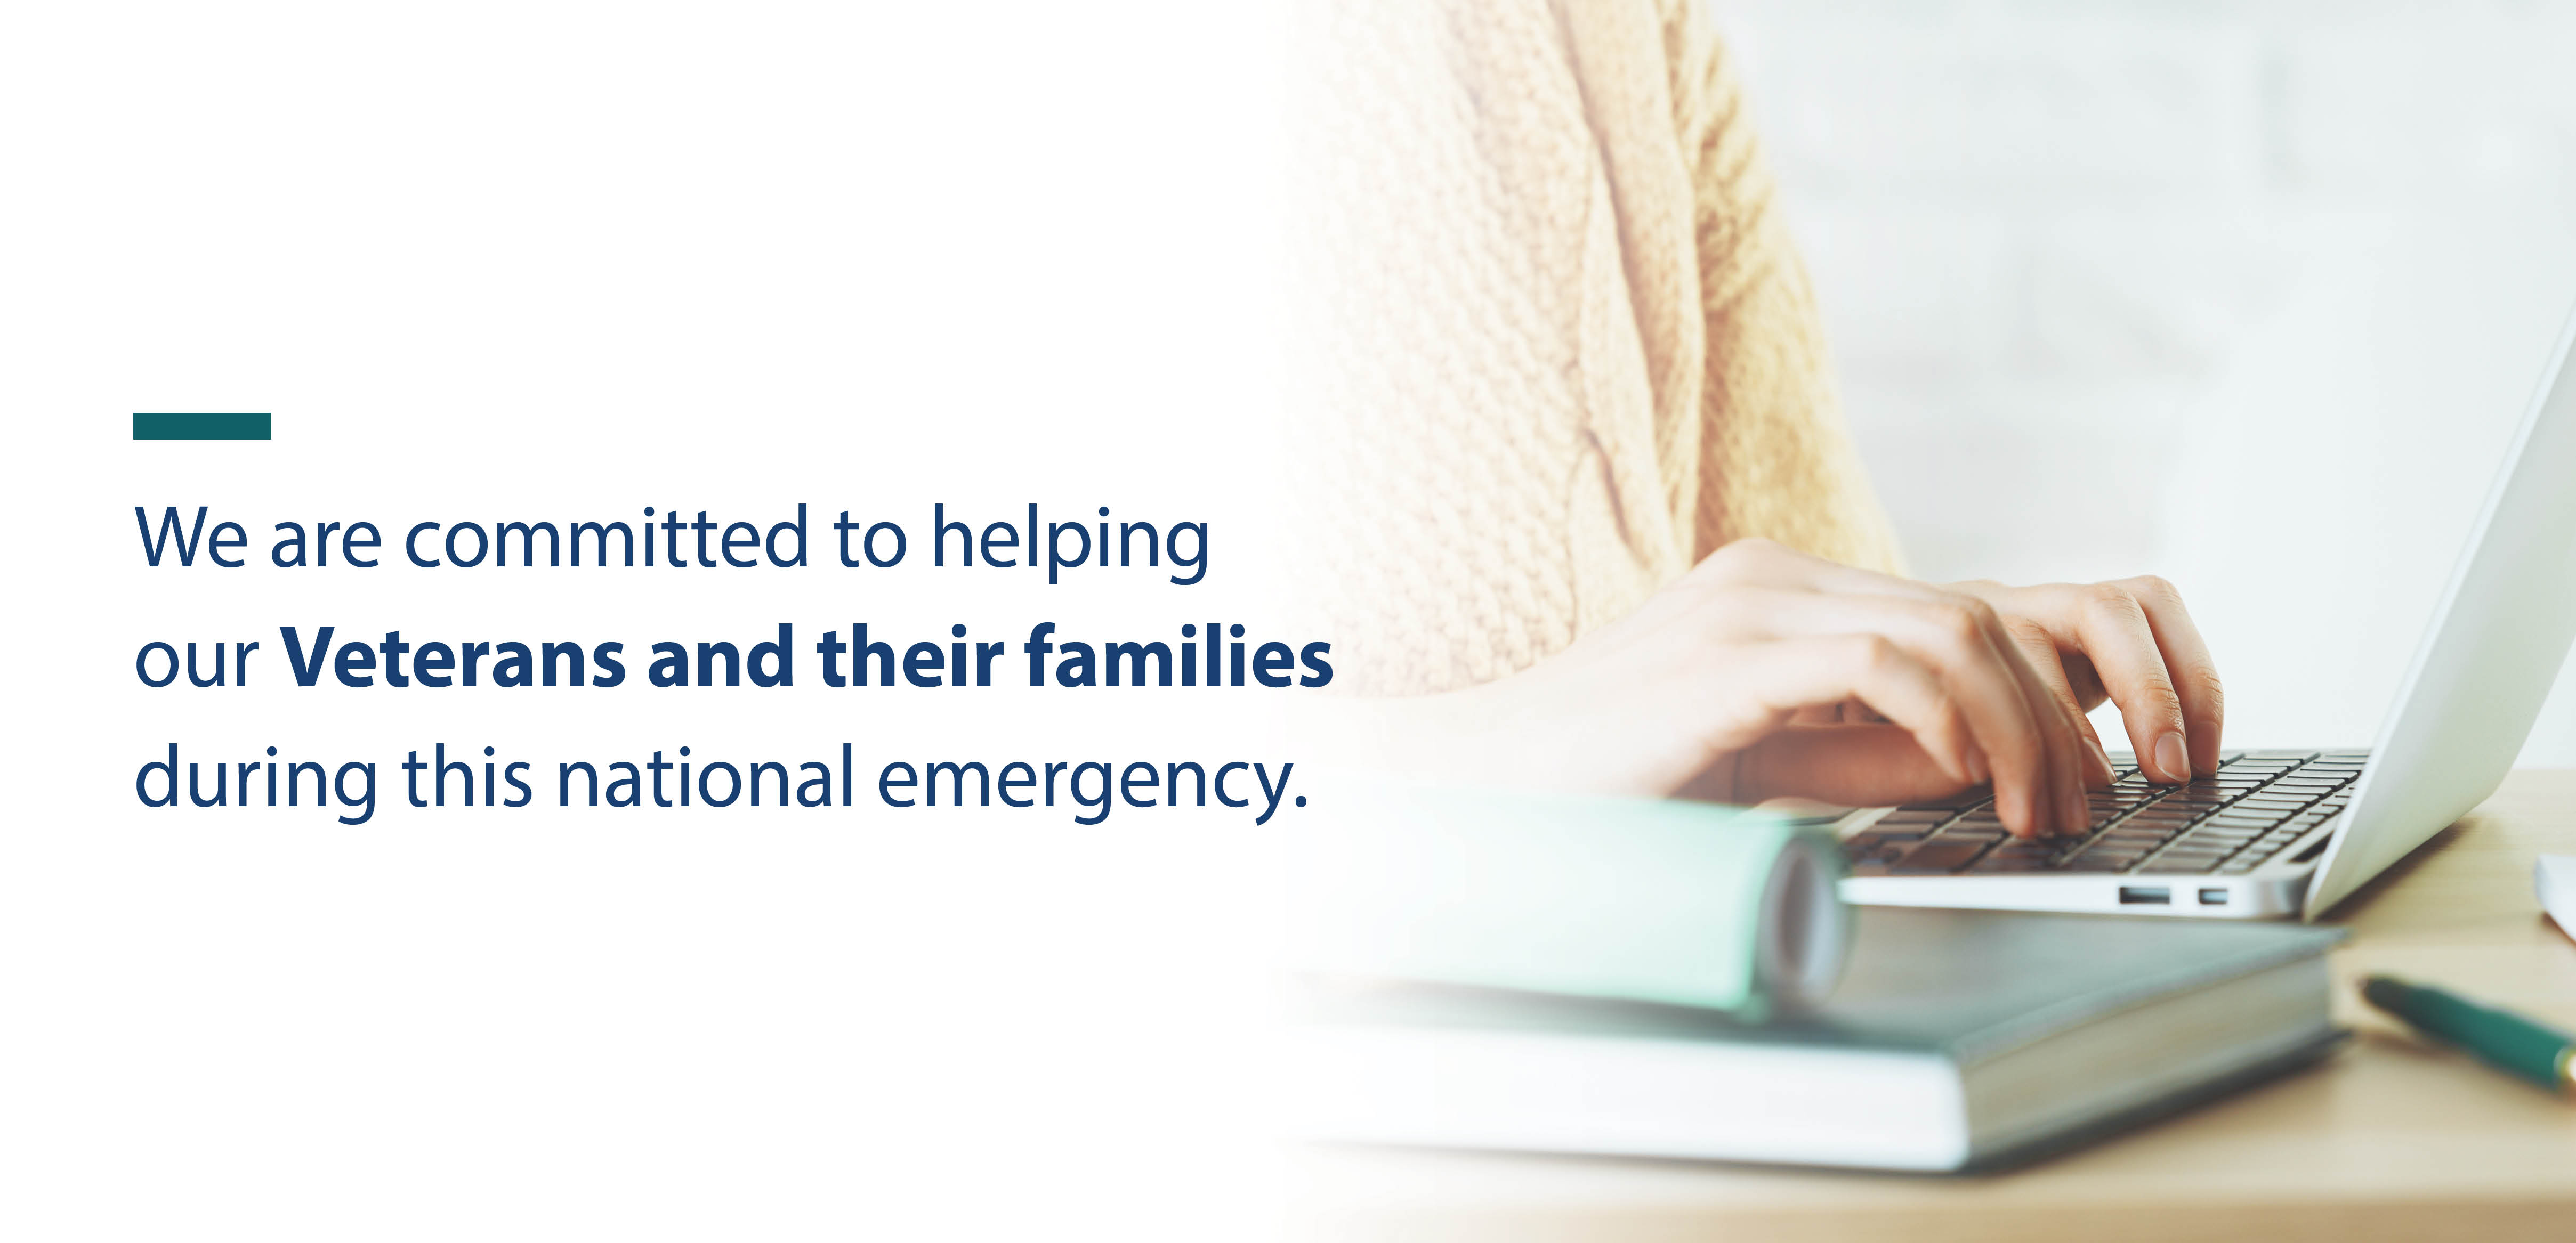 We are committed to helping our Veterans and their families during this national emergency.